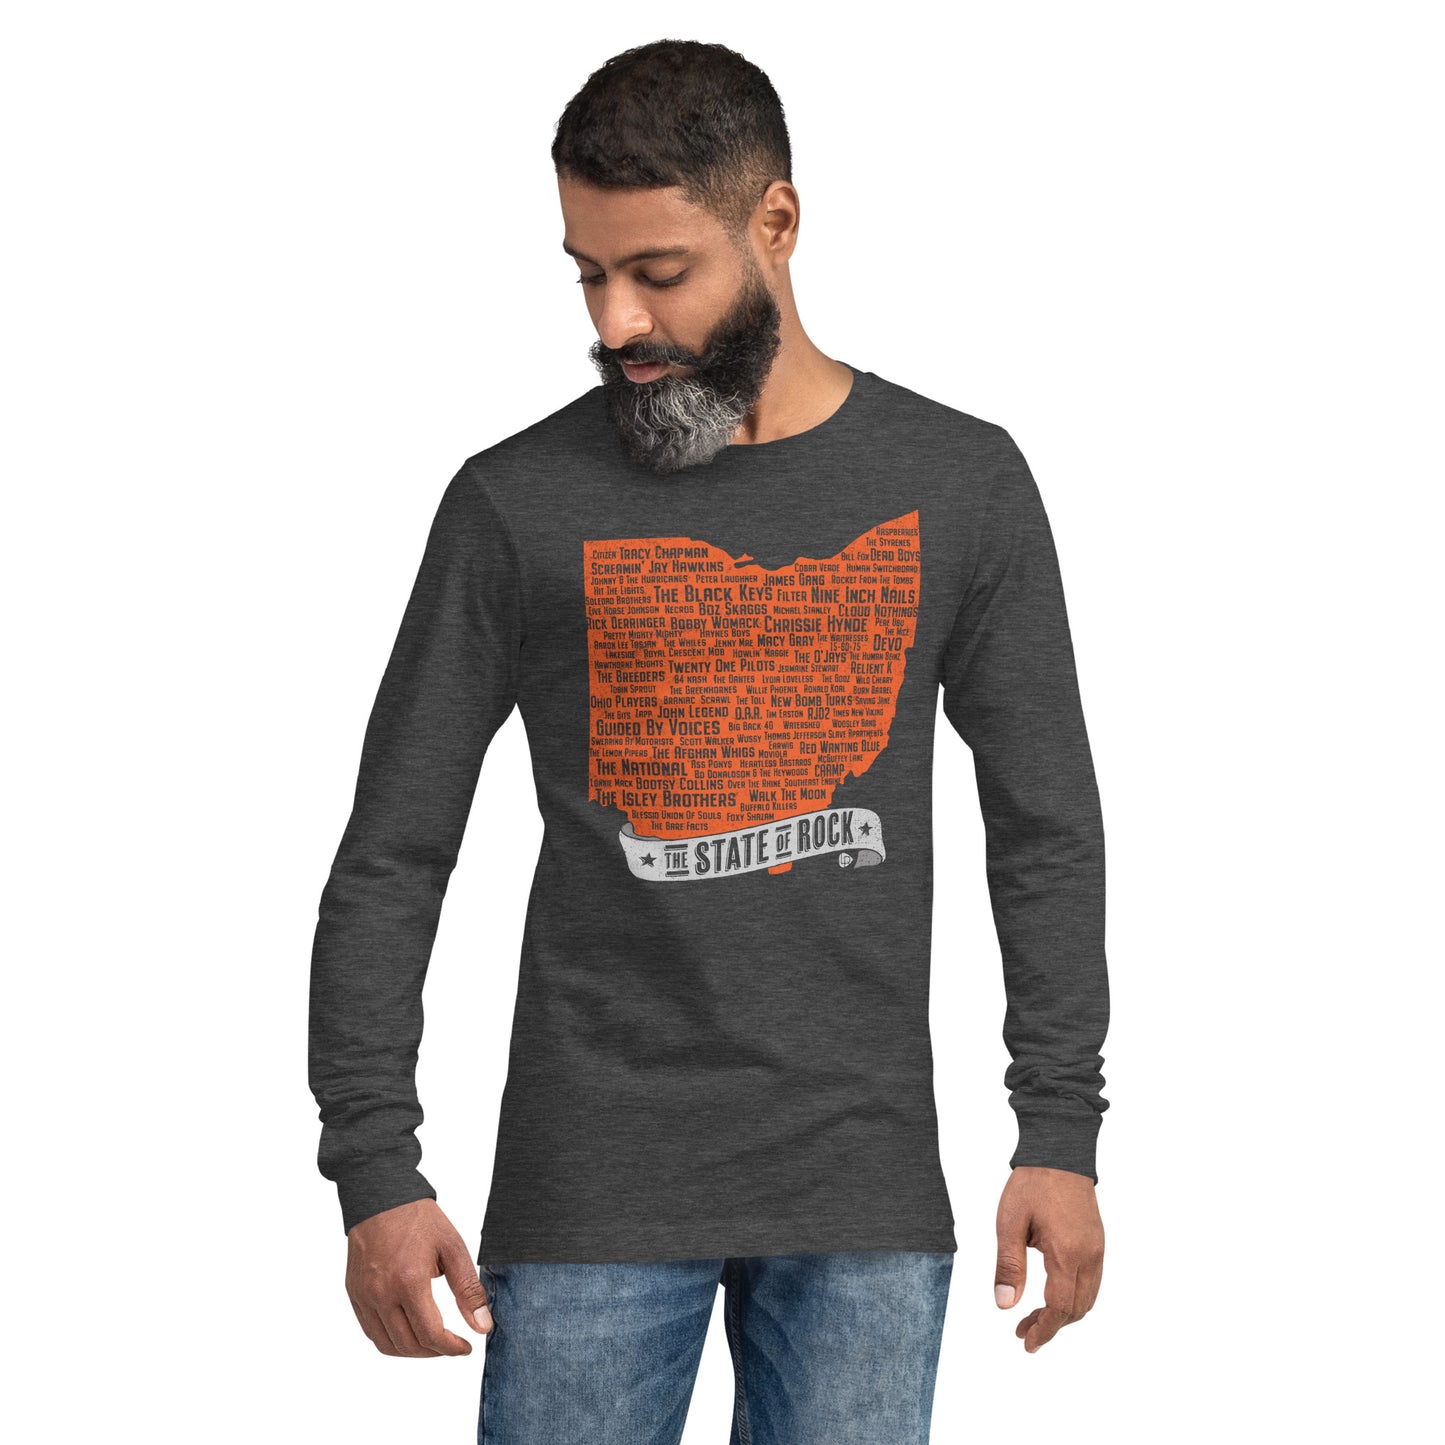 The State of Rock Tailgate Long Sleeve Tee - Lost Radicals